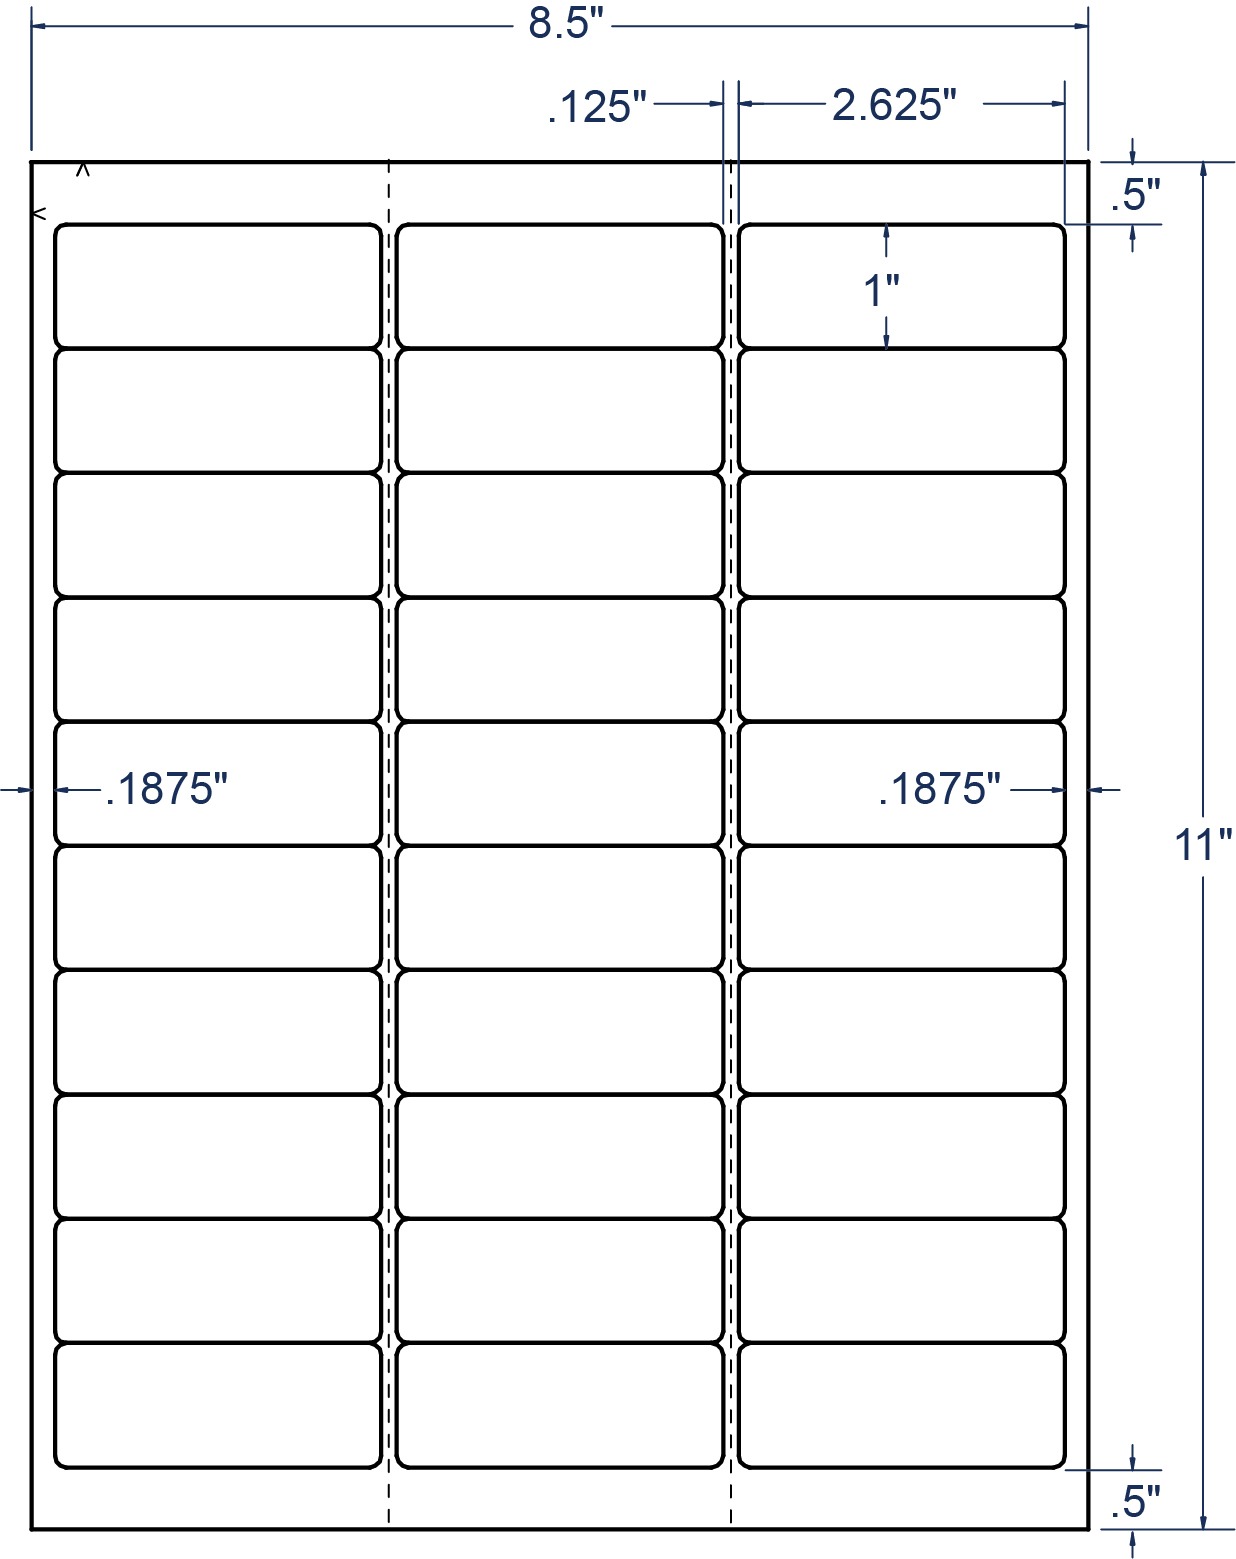 2-5/8" x 1" Removable Sheeted Labels (100 Sheets)